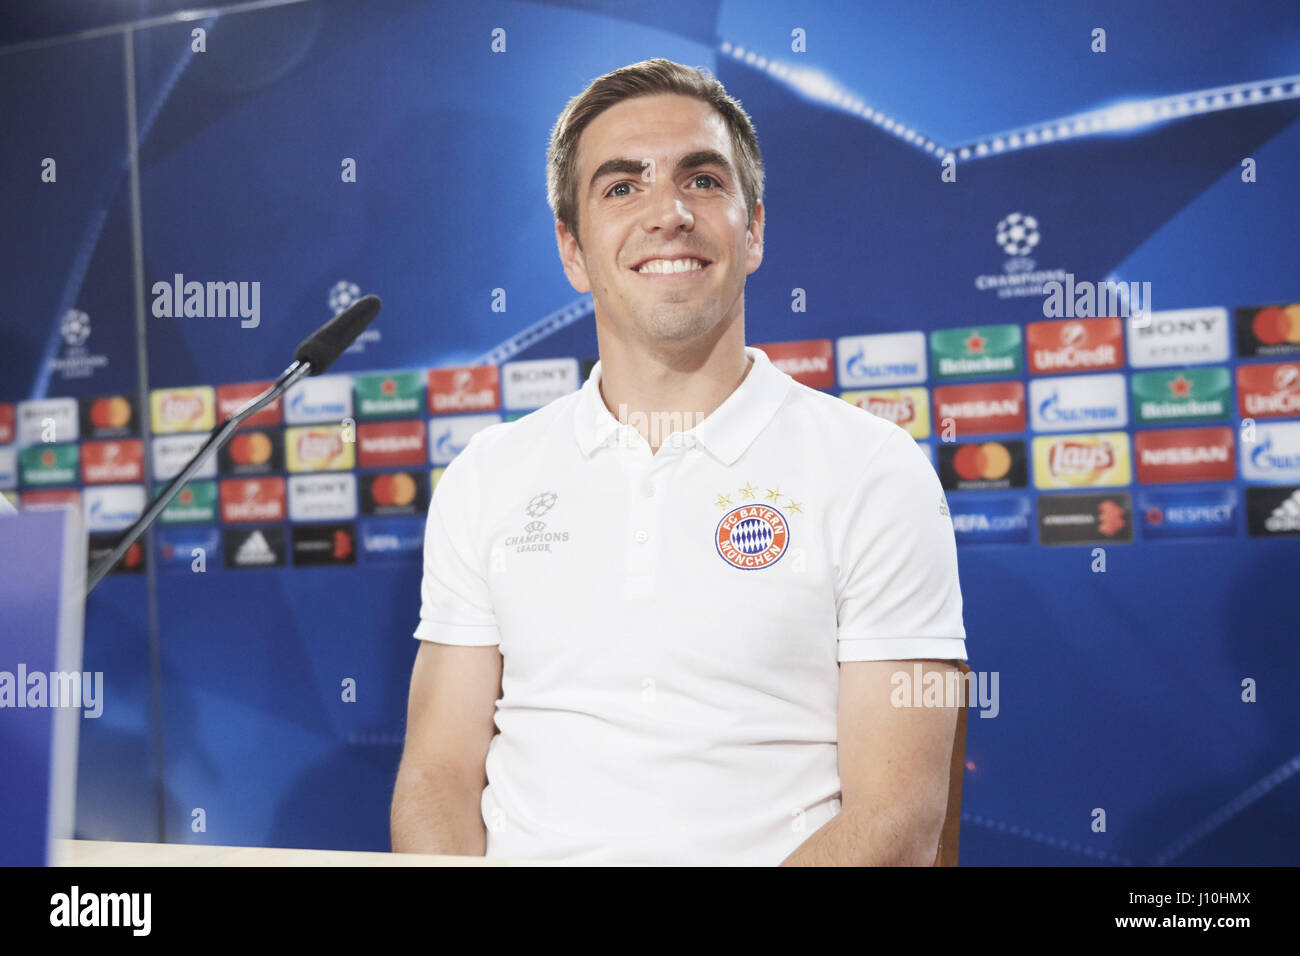 Madrid, Madrid, Spain. 17th Apr, 2017. Philipp Lahm (defender; Bayern Munchen) during a press conference held at Santiago Bernabeu stadium in Madrid, Spain, 17 April 2017. Real Madrid will face Bayern Munich in a Champions League quarter finals second leg soccer match on 18 April. Credit: Jack Abuin/ZUMA Wire/Alamy Live News Stock Photo